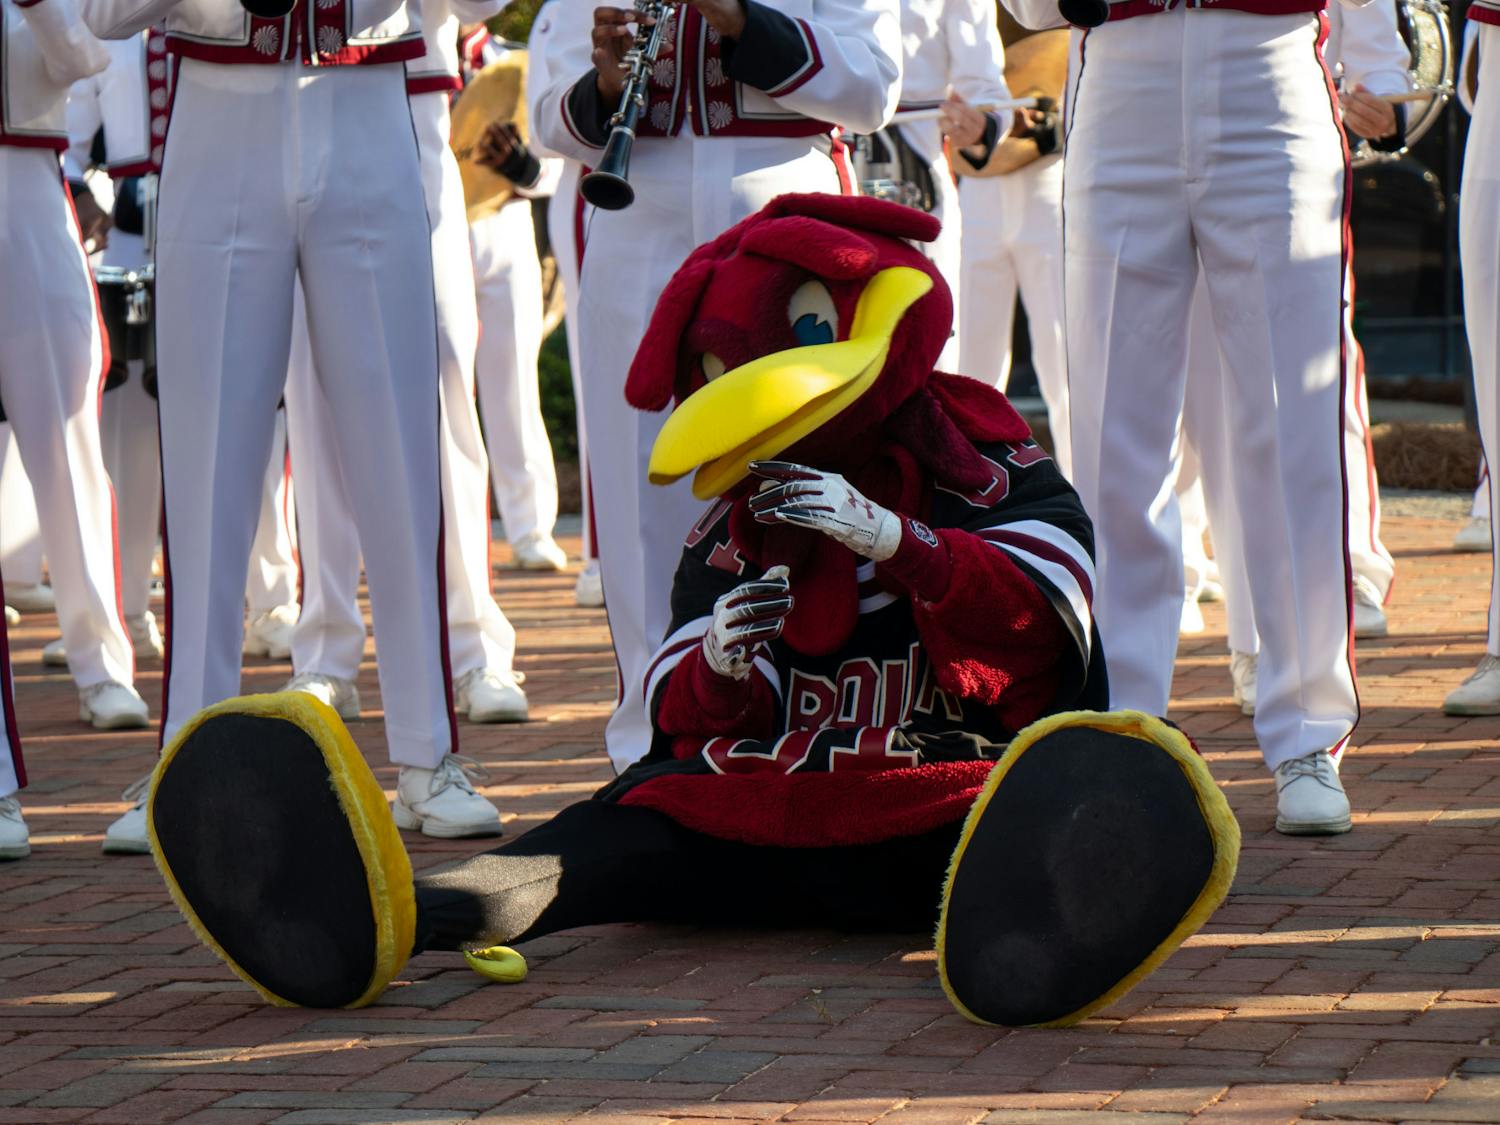 Cocky joins in with the Carolina Band during the Campus Village ribbon-cutting ceremony on Aug. 18, 2023. The ribbon-cutting celebrated the opening of USC's newest dorms with students, administrators, faculty and staff in attendance.